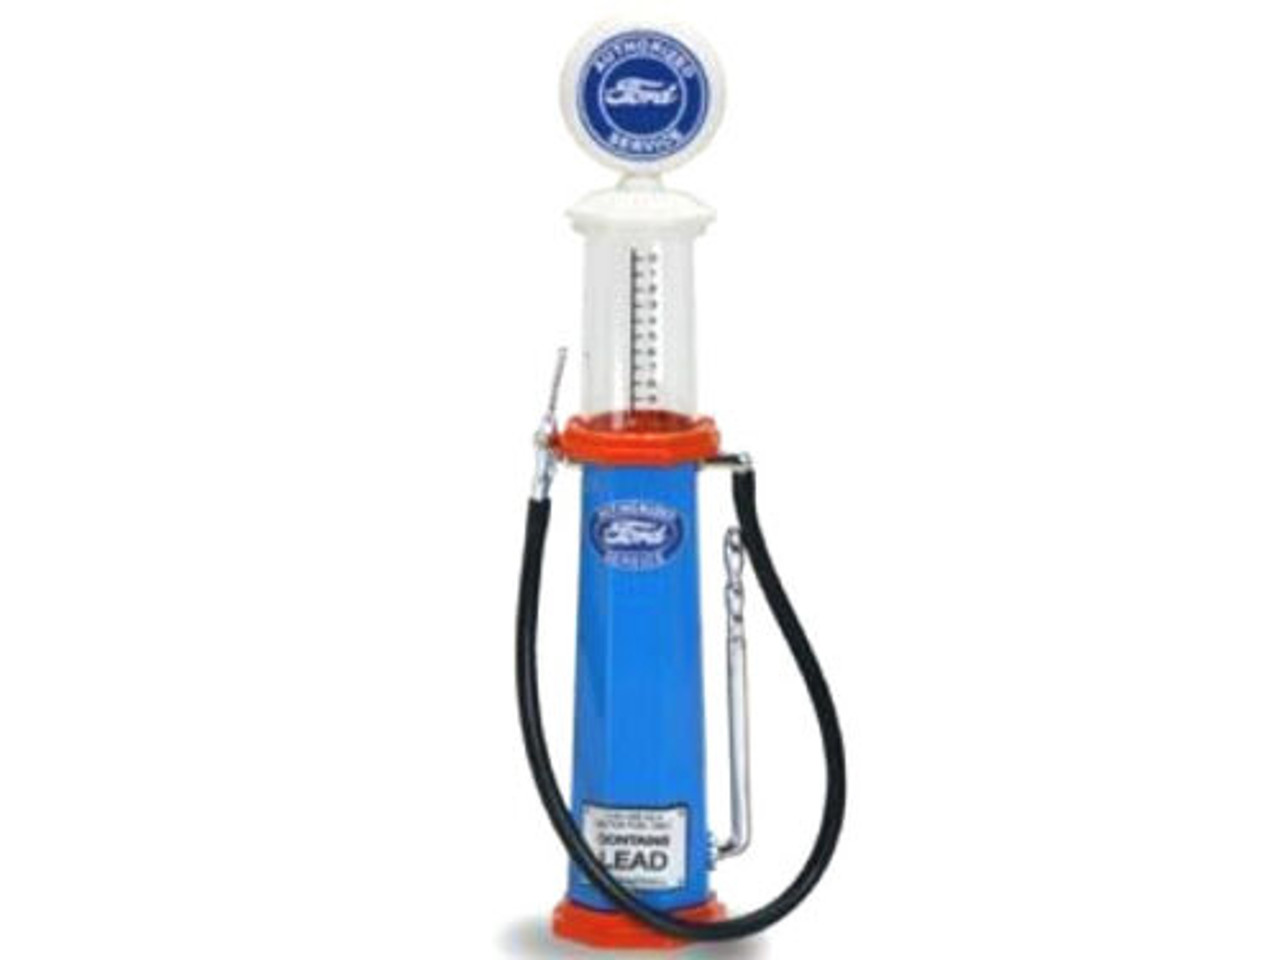 1/18 Road Signature Ford Gas Pump Cylinder Model